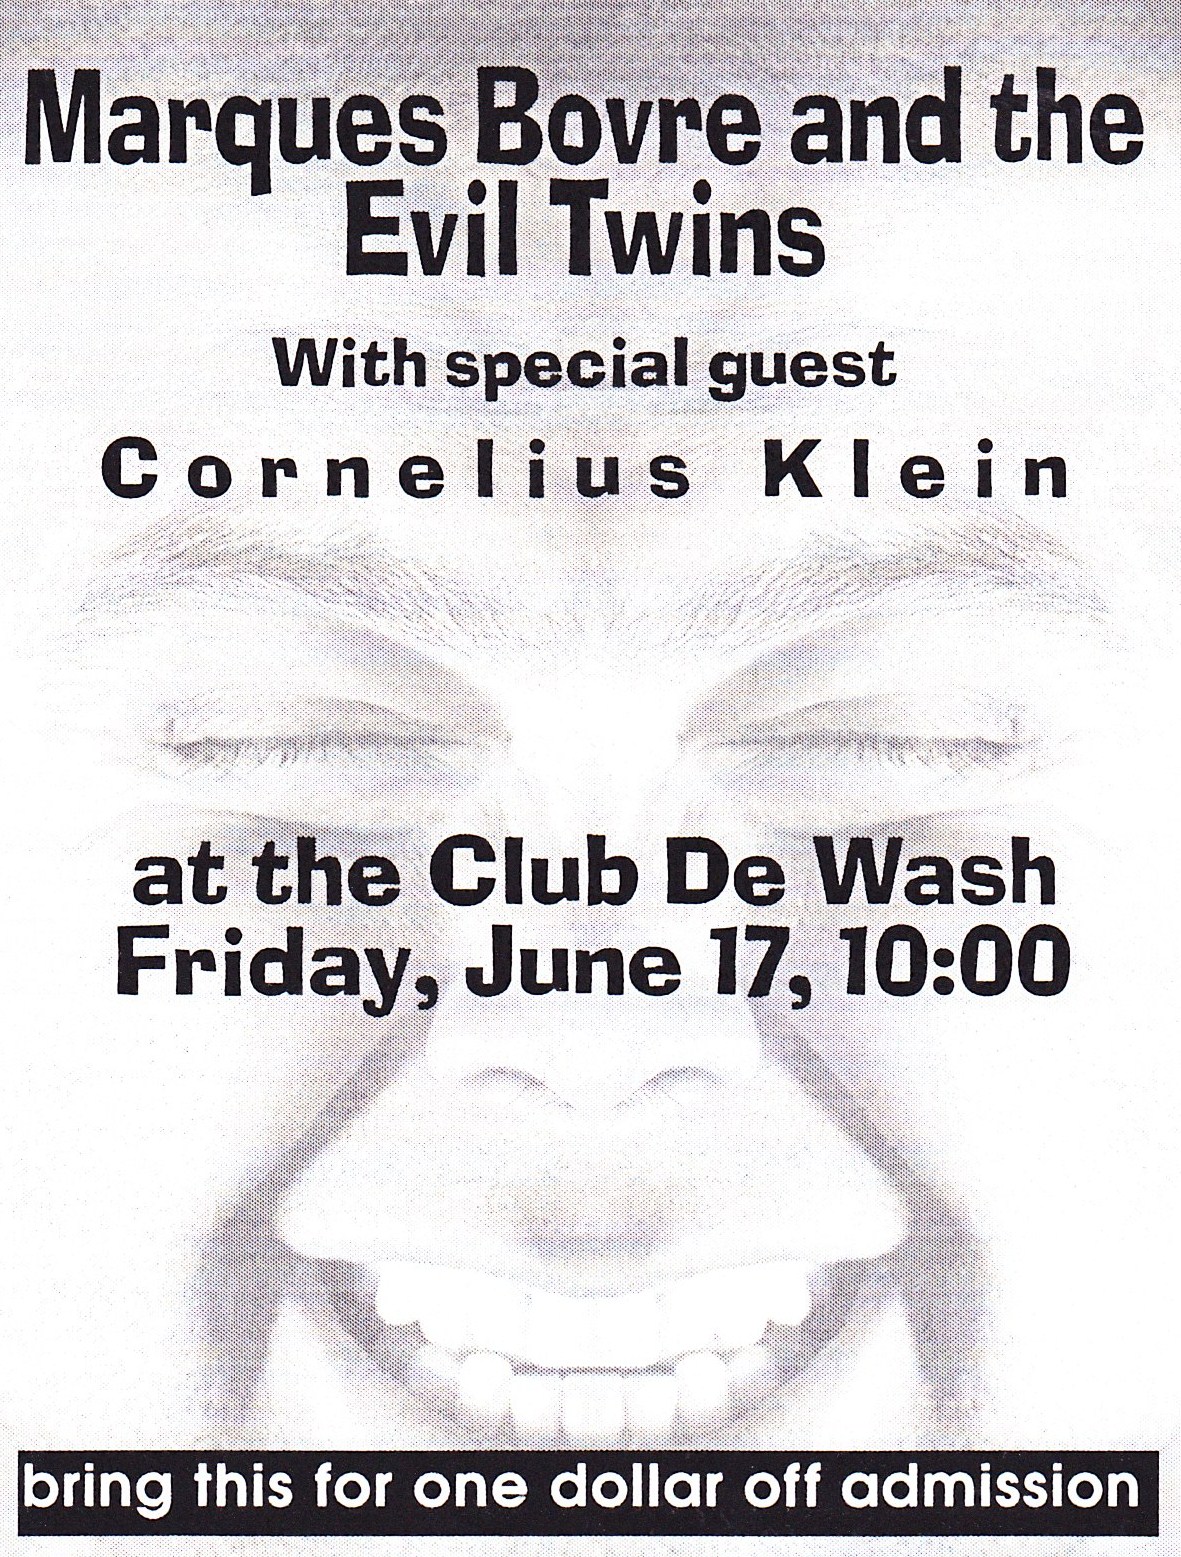 Marques Bovre and the Evil Twins, June 17, 1994